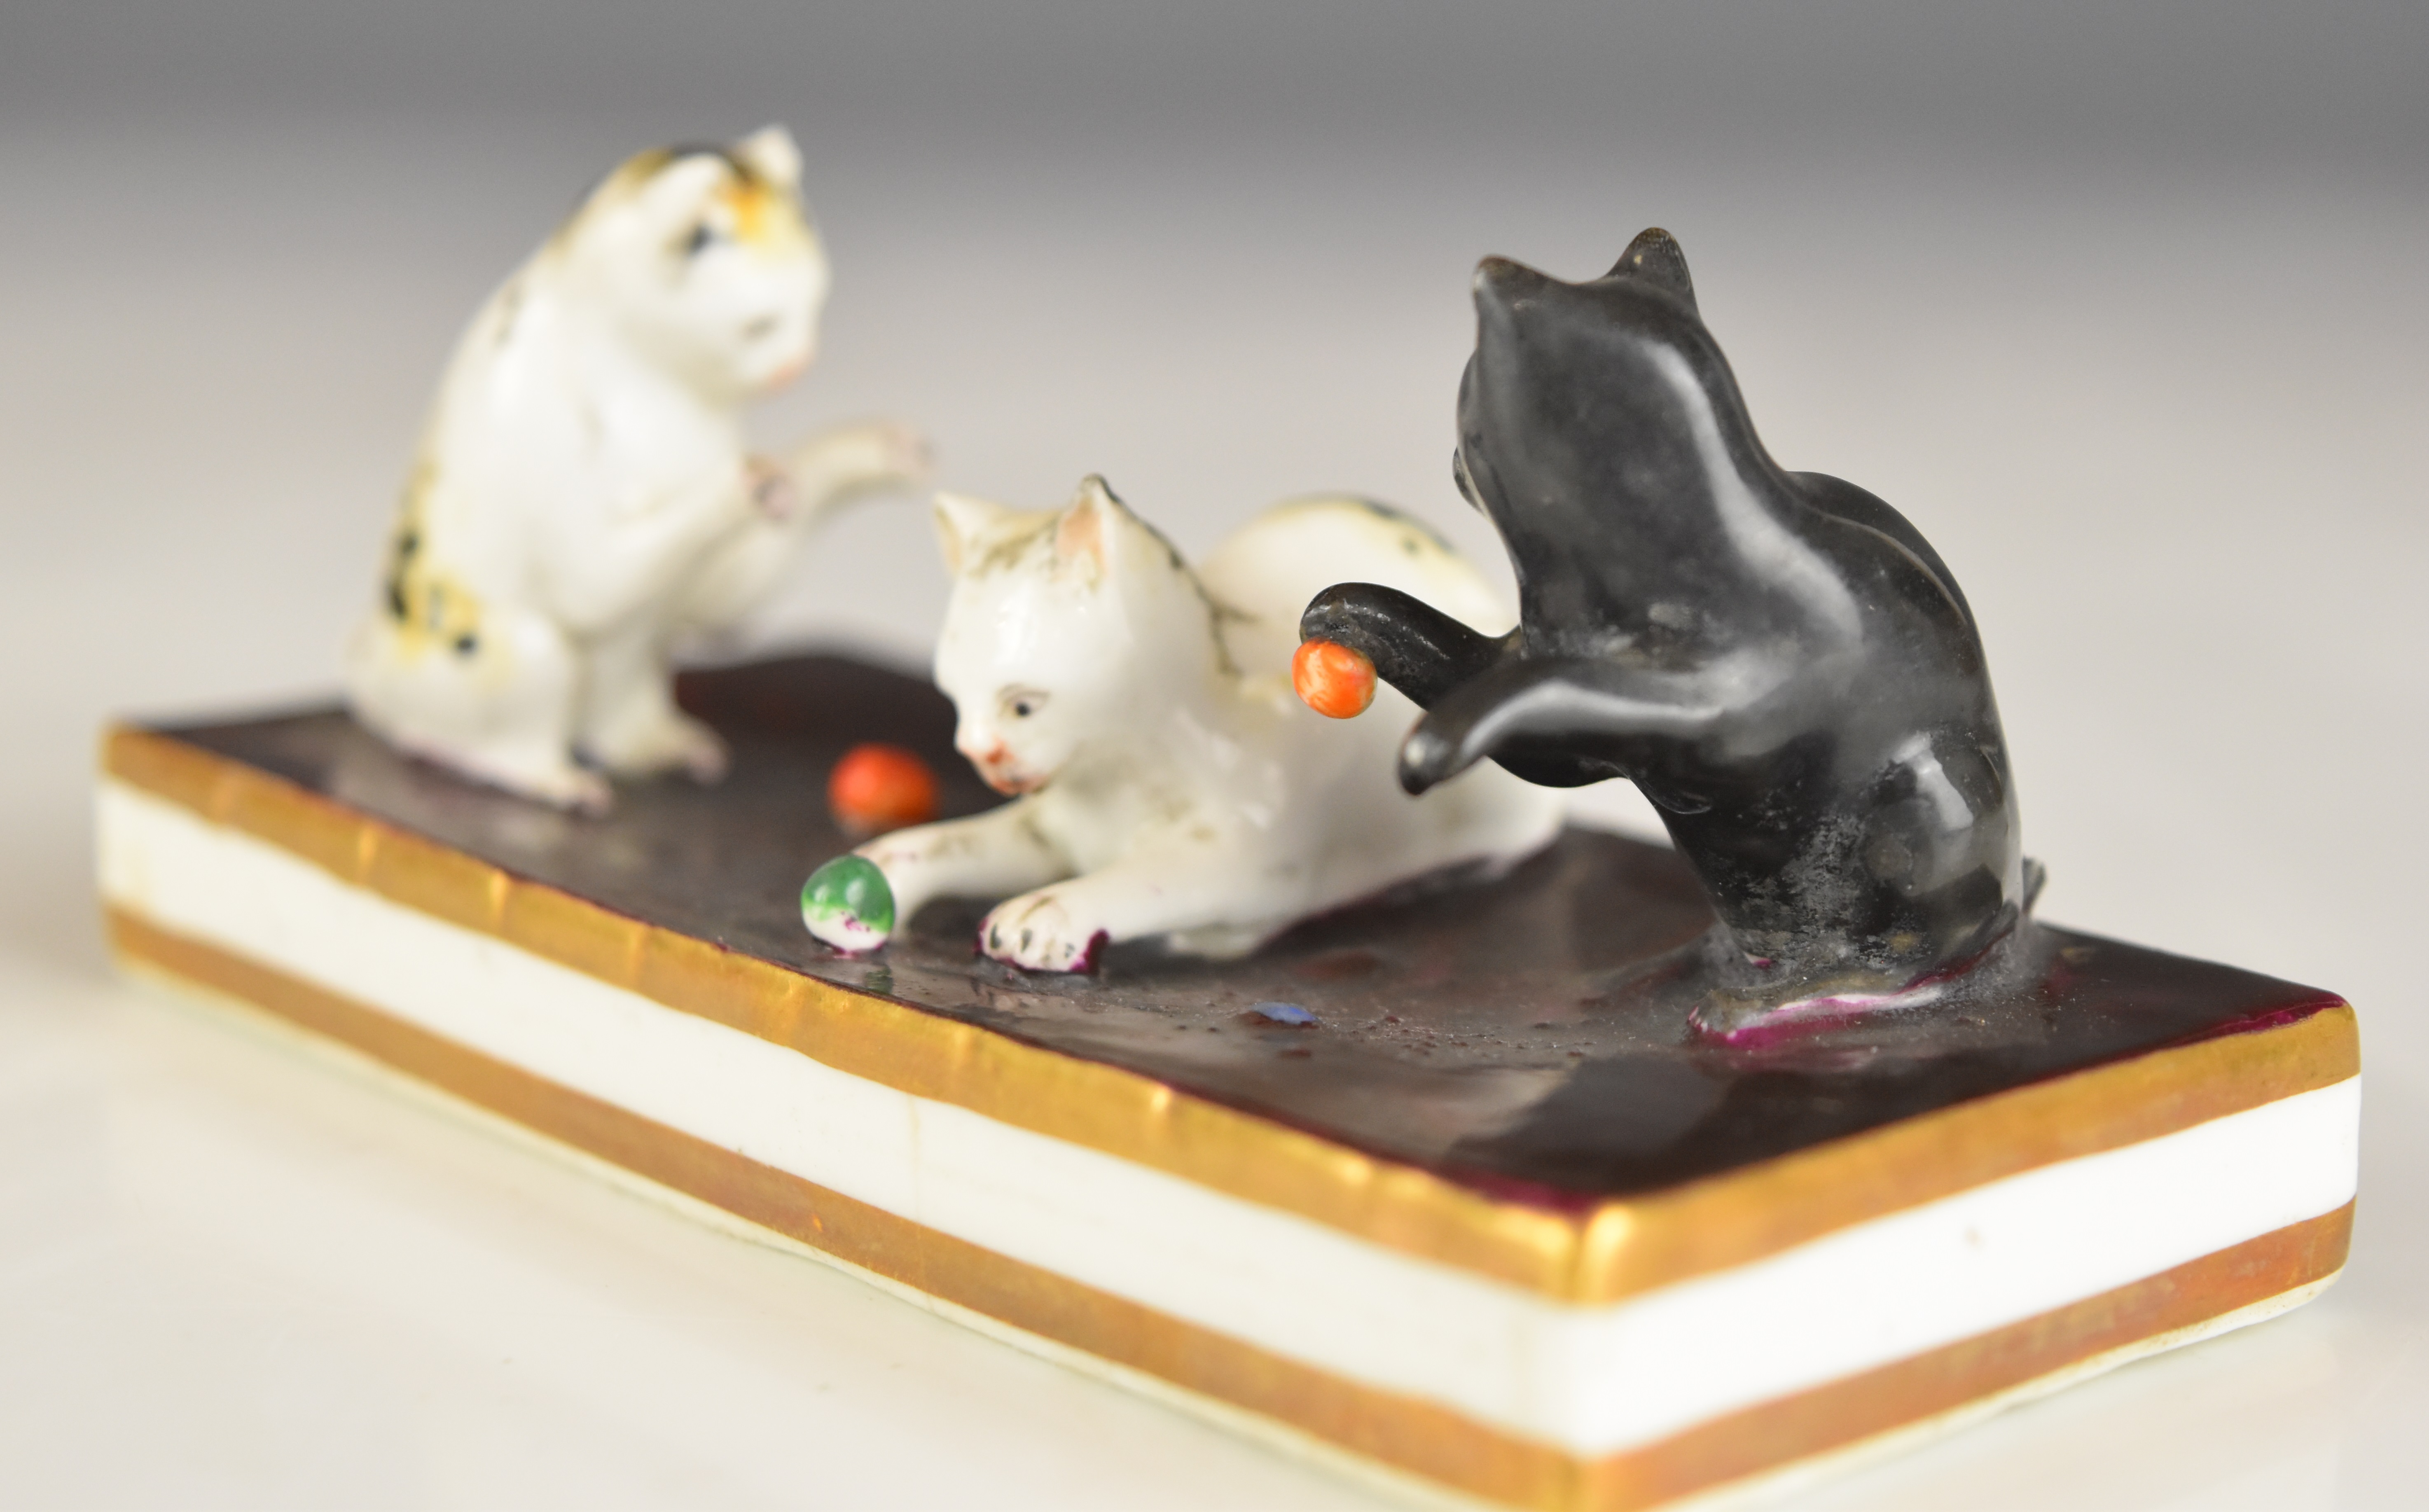 19thC novelty miniature porcelain tableau of three kittens playing, W10 x D4.5 x H4.5cm - Image 3 of 8